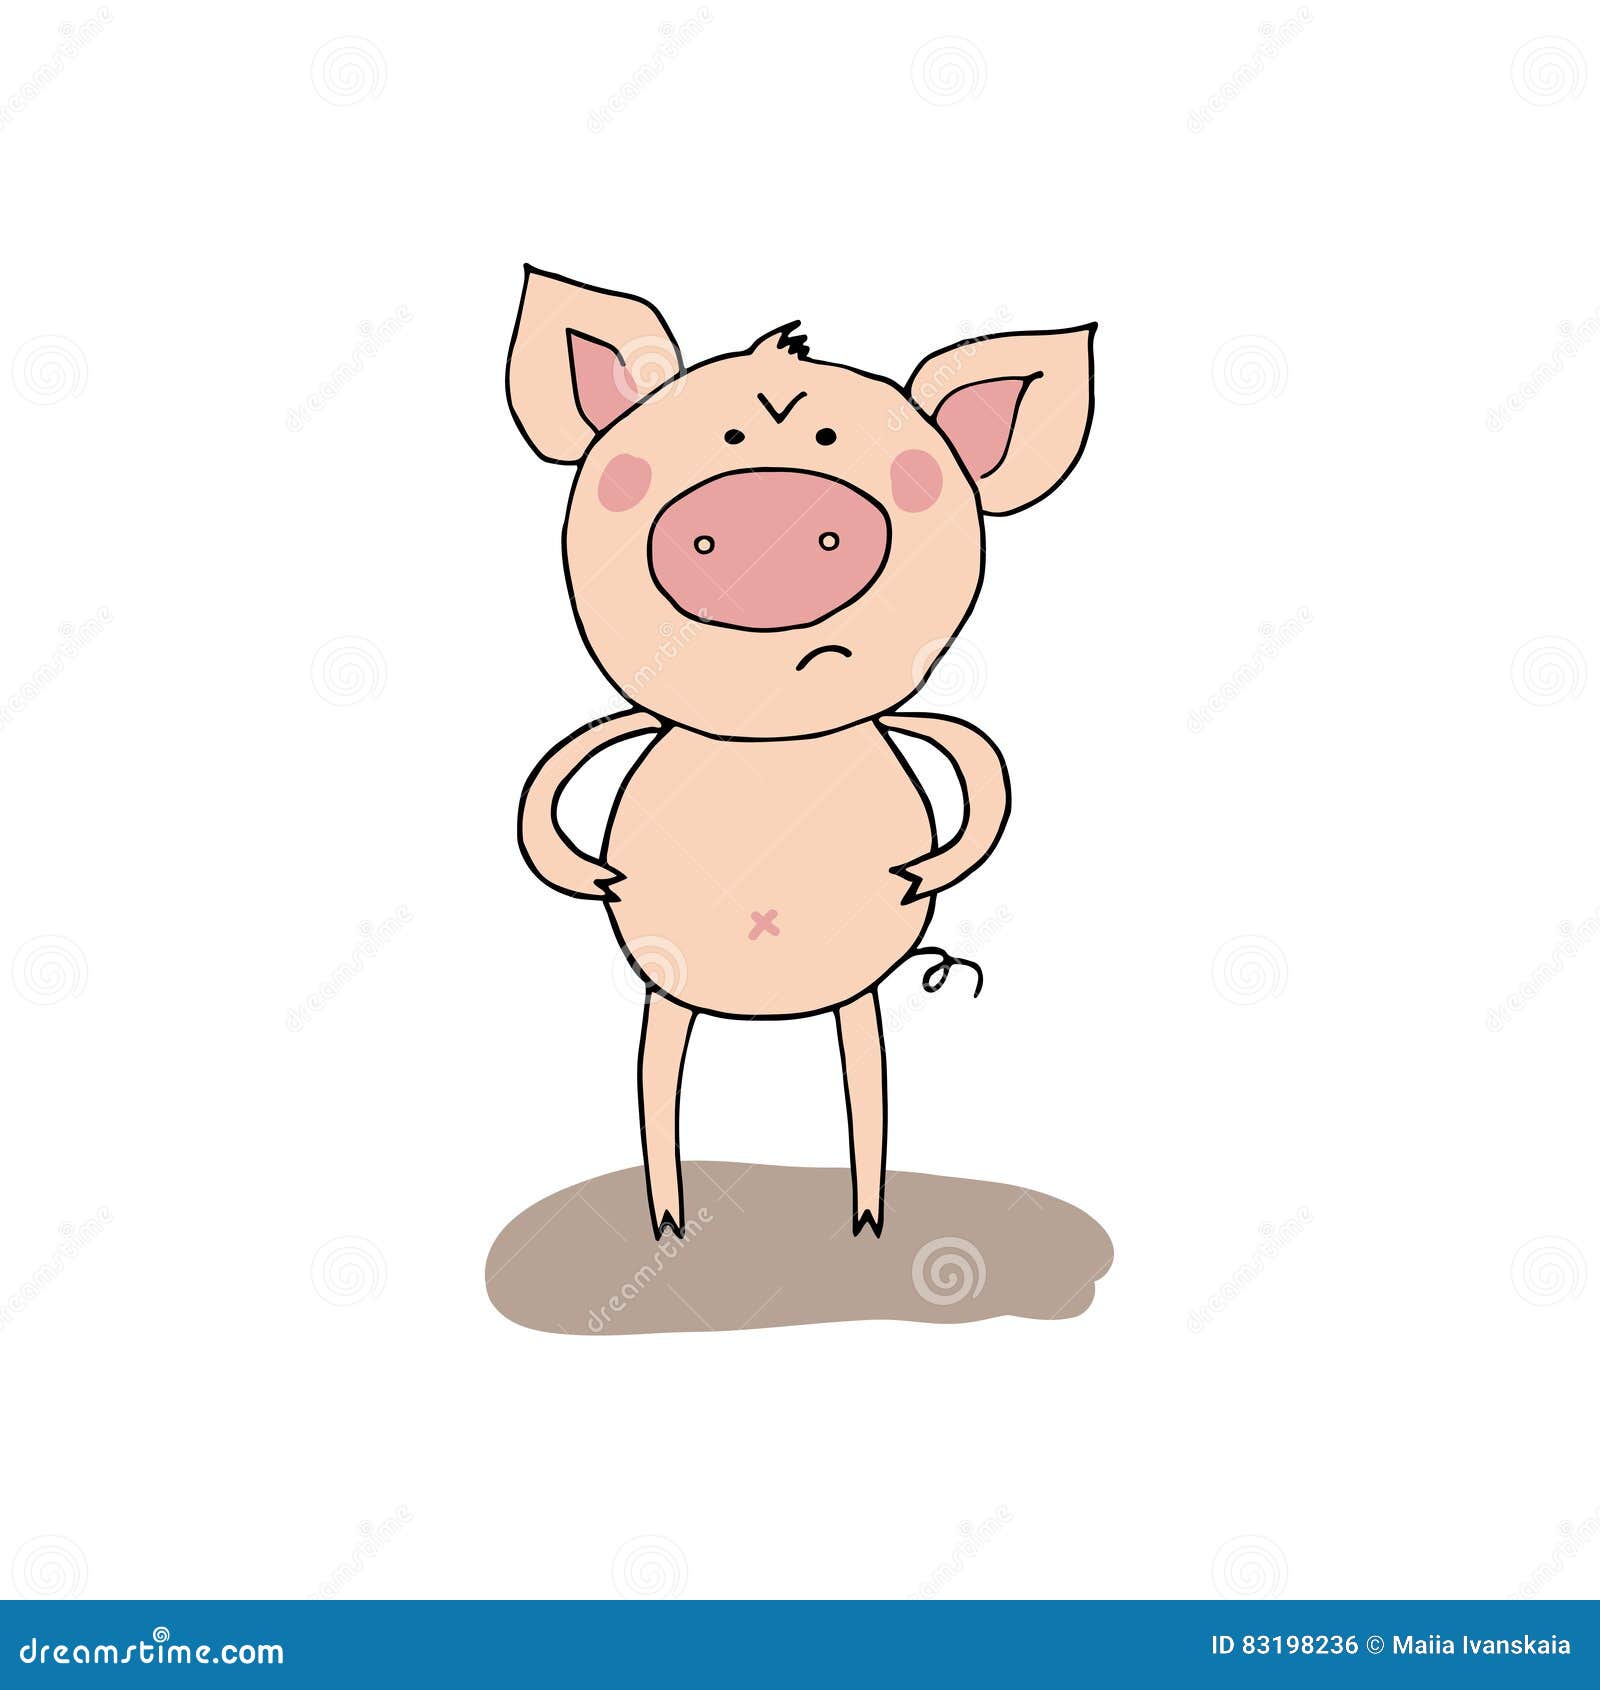 Cute Funny Angry Pig in Cartoon Style Stock Vector - Illustration of nice,  piggy: 83198236